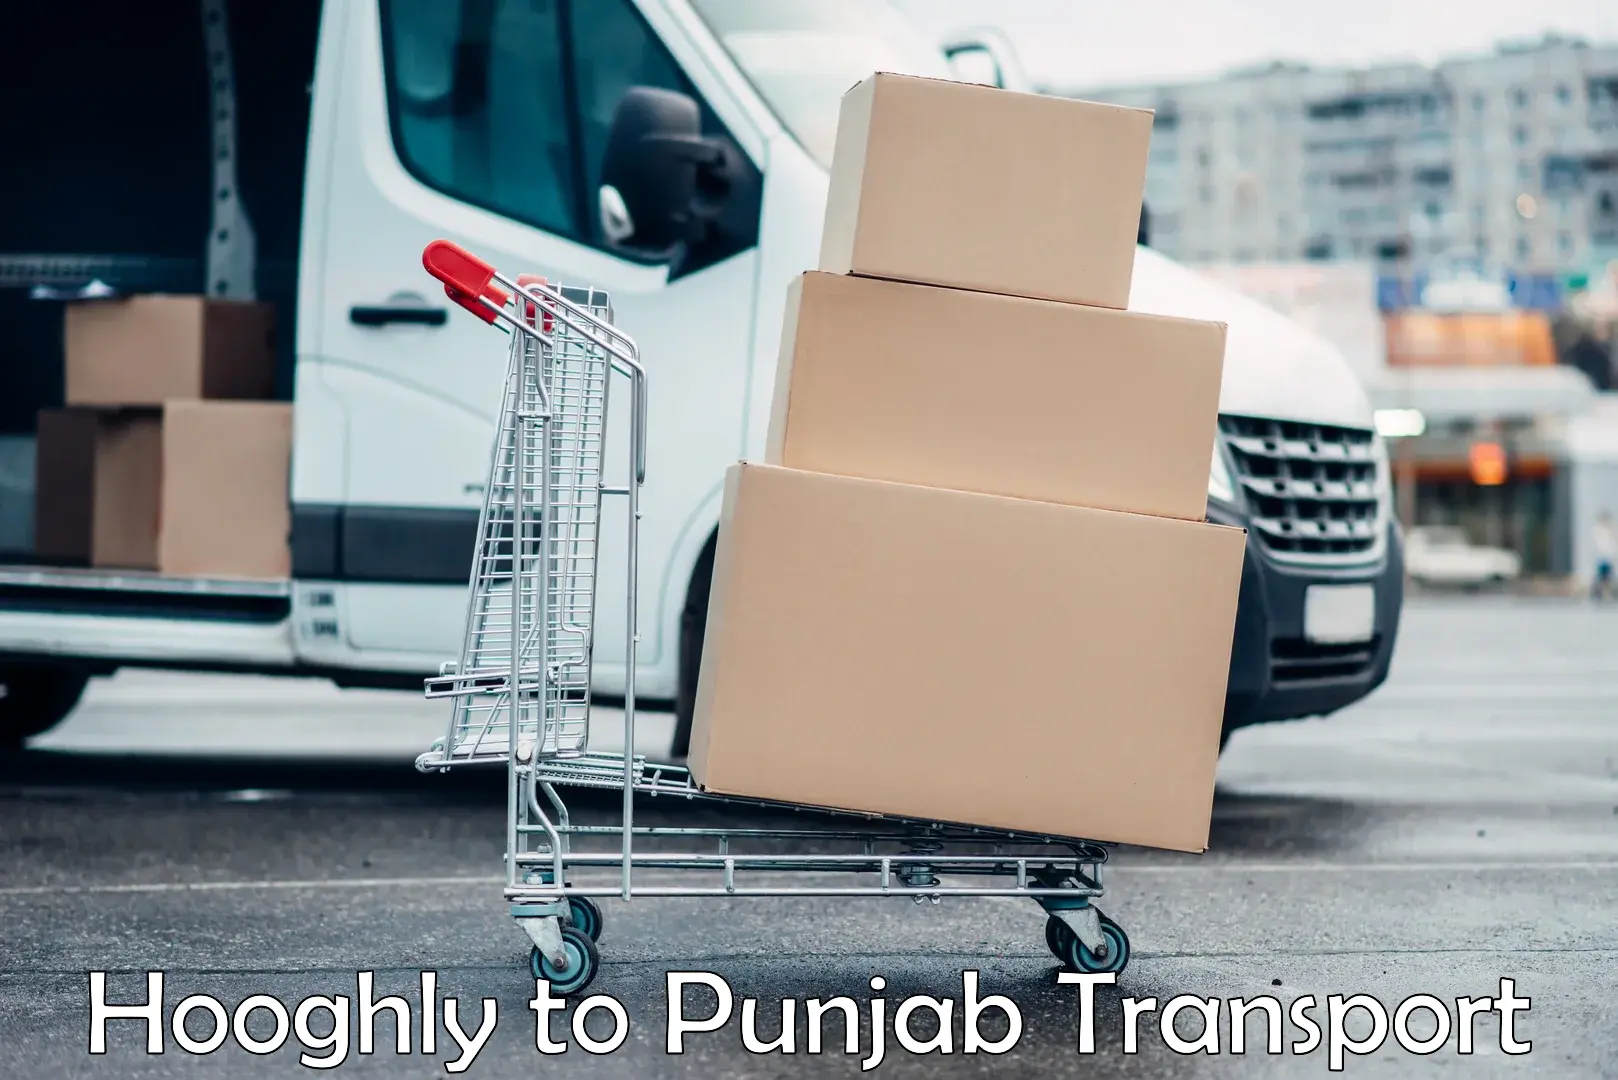 Road transport online services Hooghly to Jalalabad